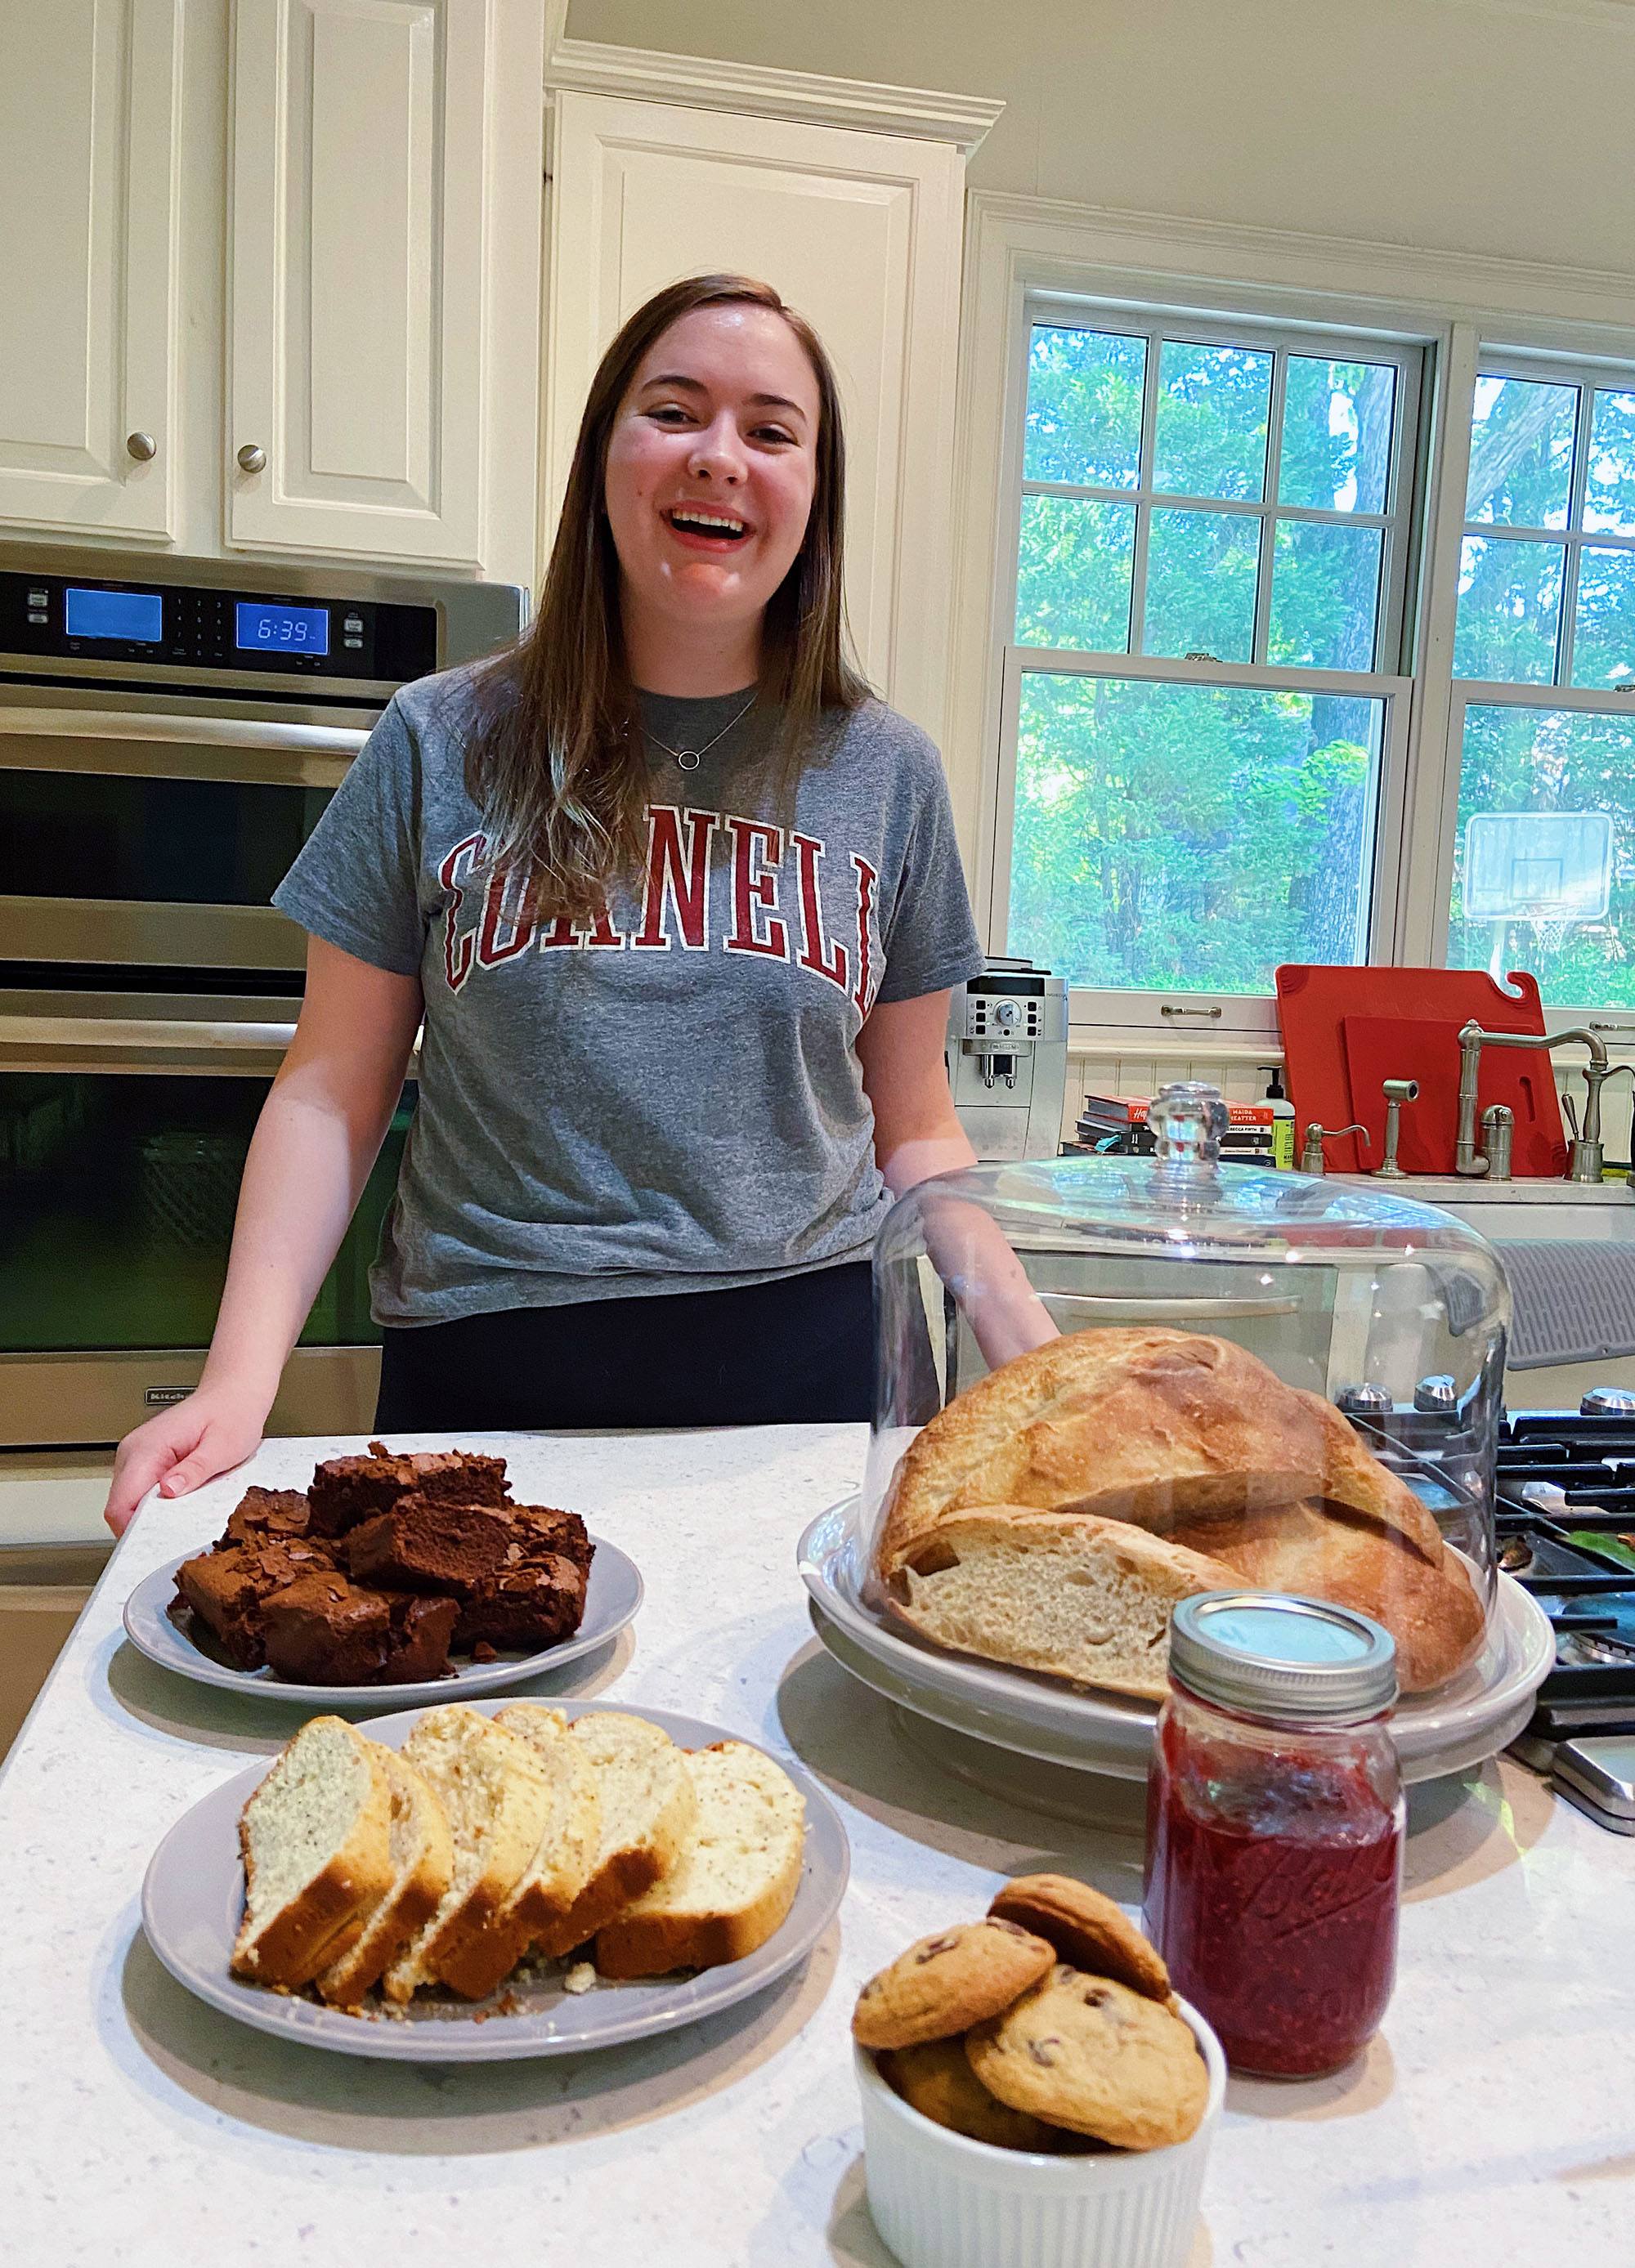 Colesy with a few of the things she’s baked in the past week: lemon poppy-seed tea cake, raspberry jam, chocolate chip cookies, magic espresso brownies, and extra tangy sourdough bread!